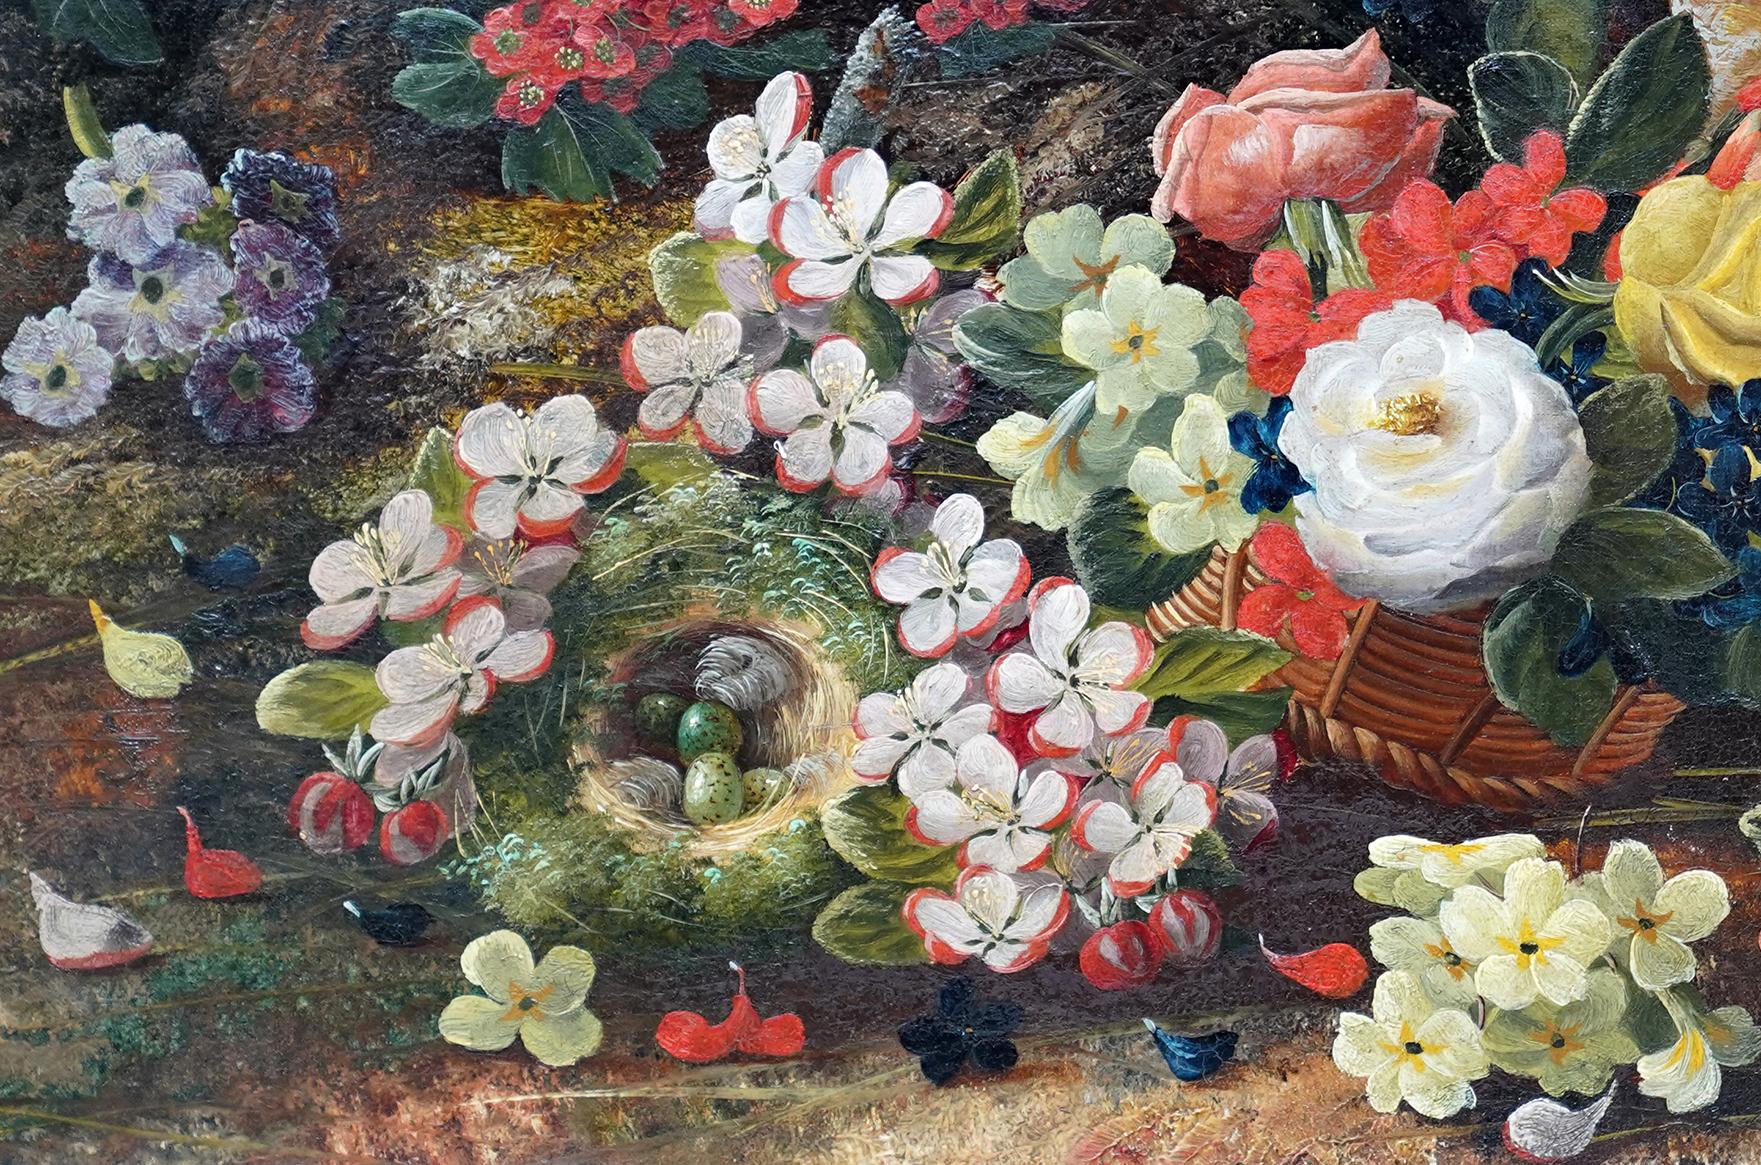 This stunning British Victorian floral still life is by 19th century born artist Henry John Livens. Painted in 1880, the setting for this colourful floral arrangement is the forest floor and bank with wild violets growing amongst the moss and